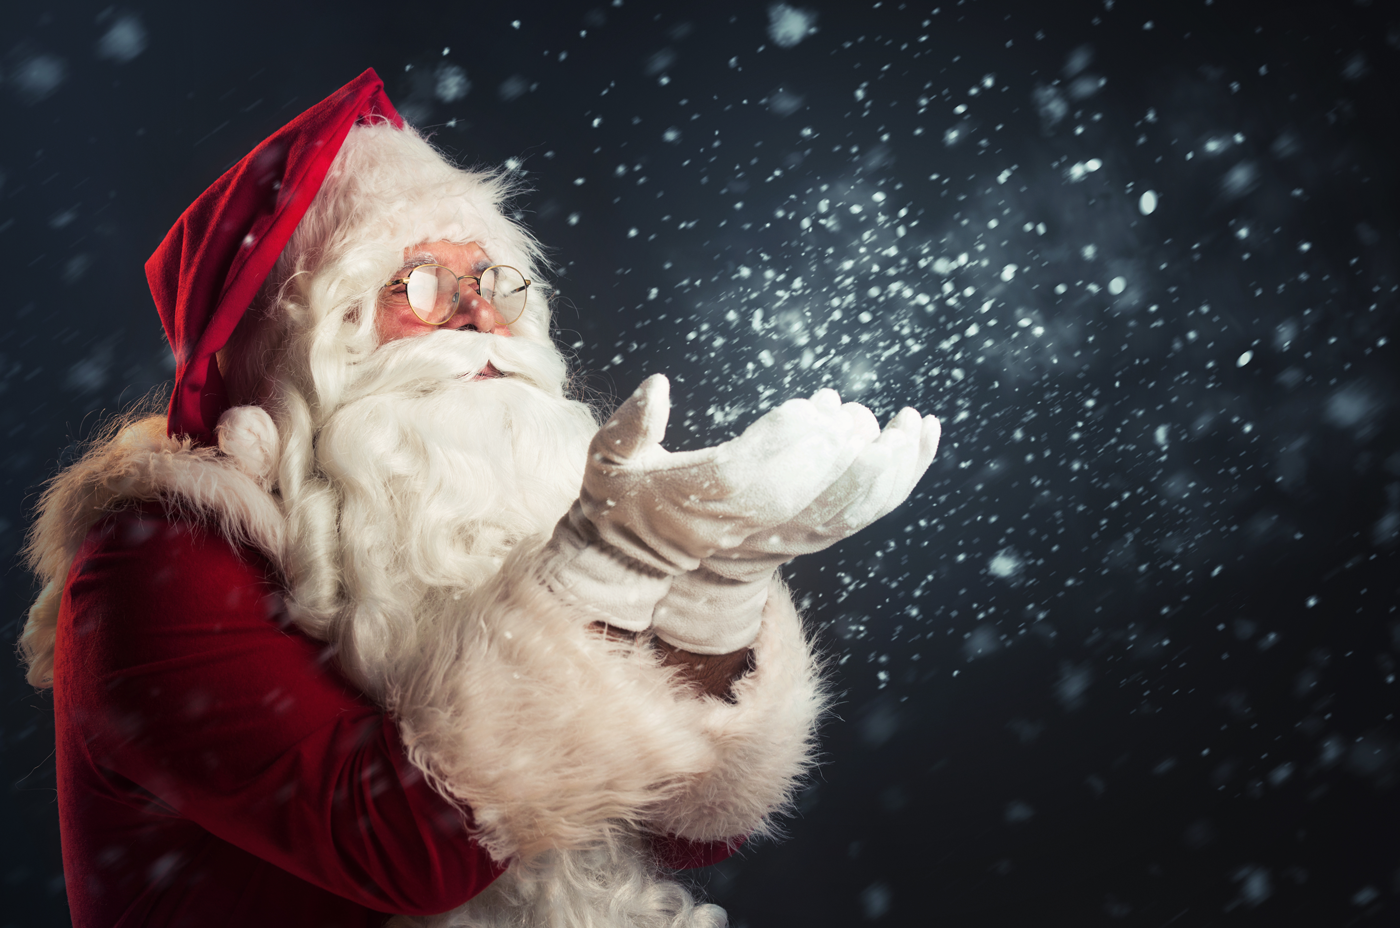 We hear Santa is coming to town. You can see him and experience the magic of Christmas when you book into the Comfort Suites, one of the best hotels in Kelowna.